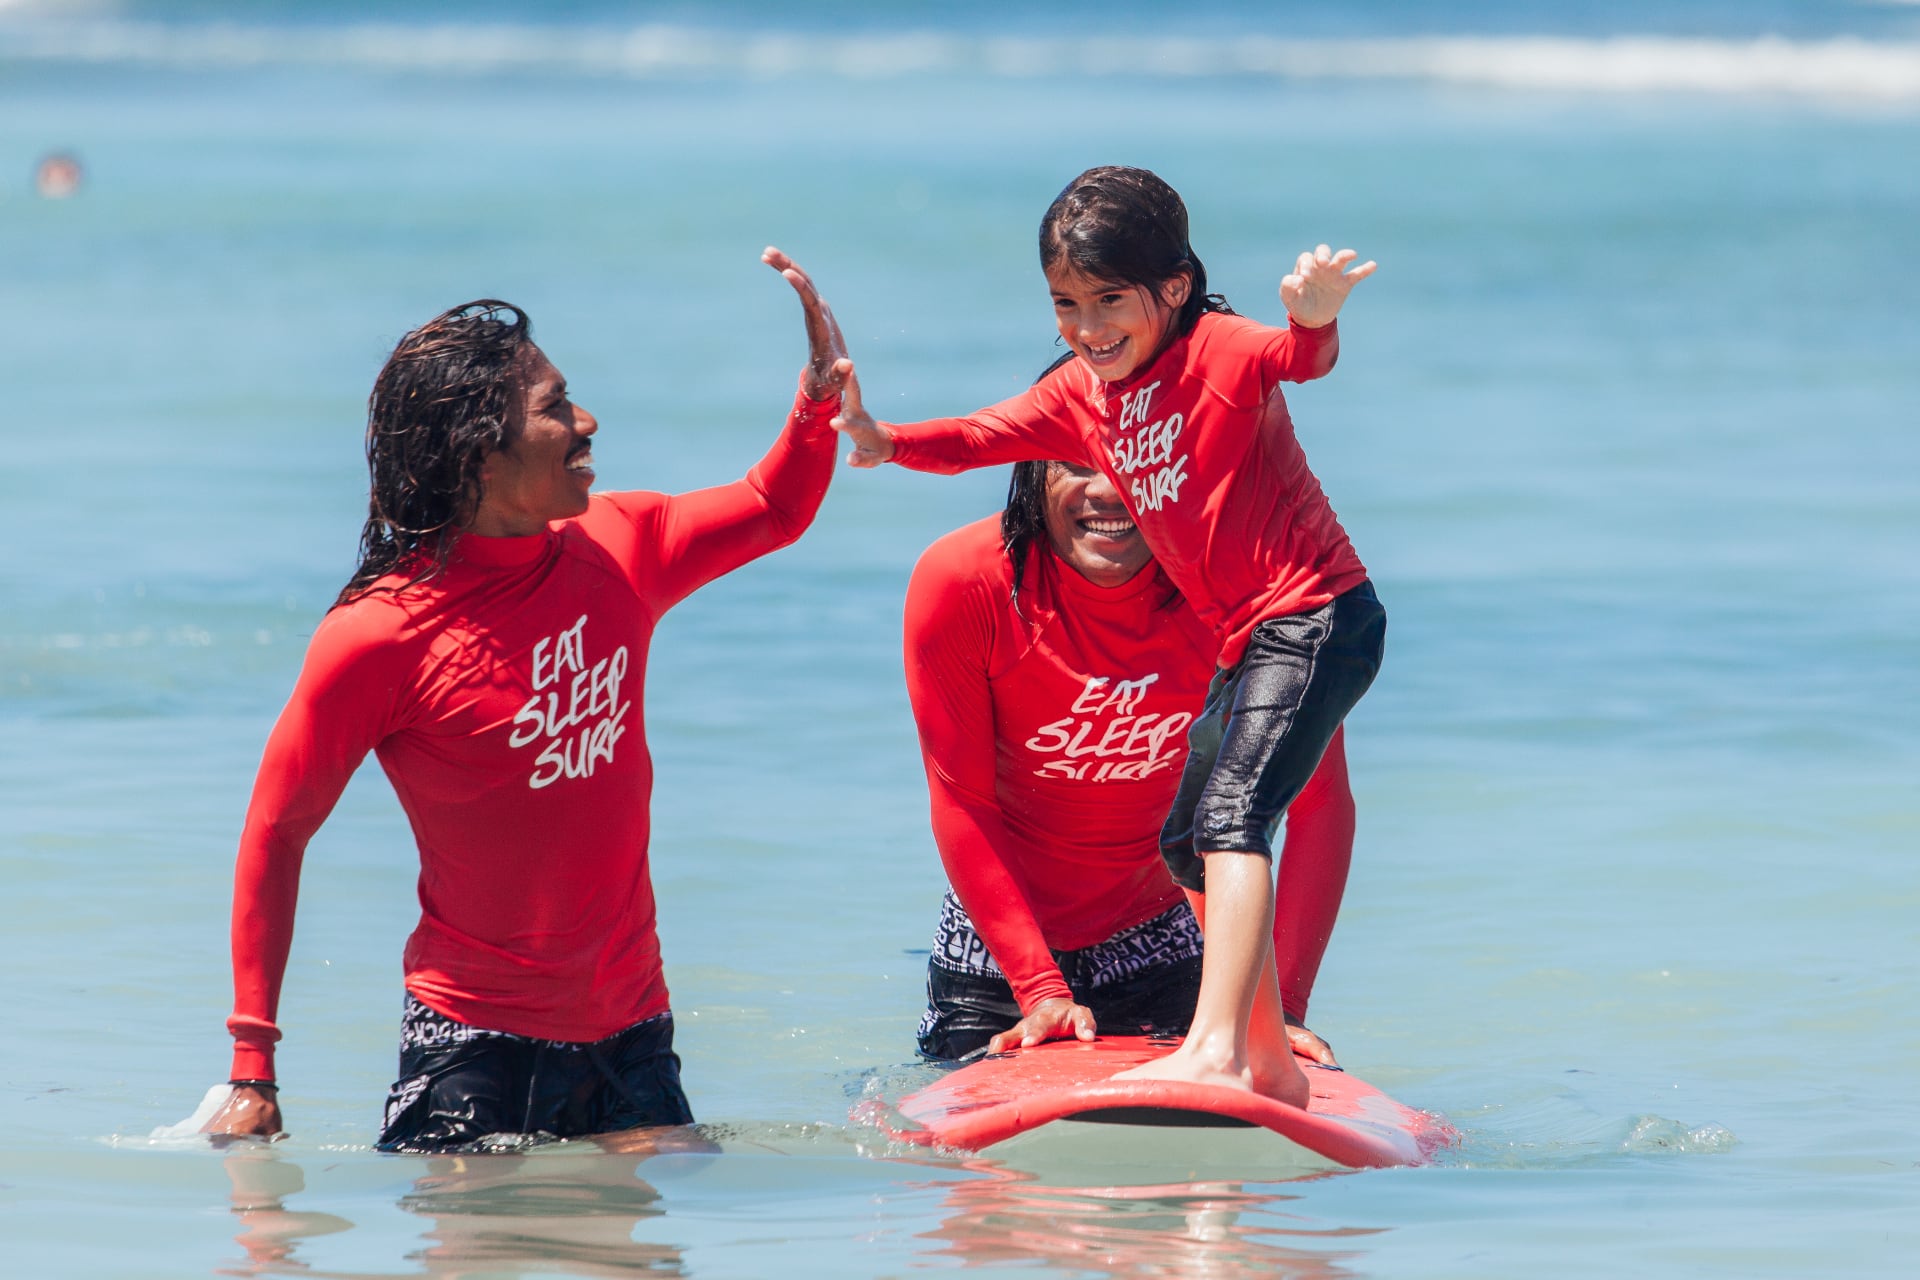 Become a surf instructor with KIMA in Bali!